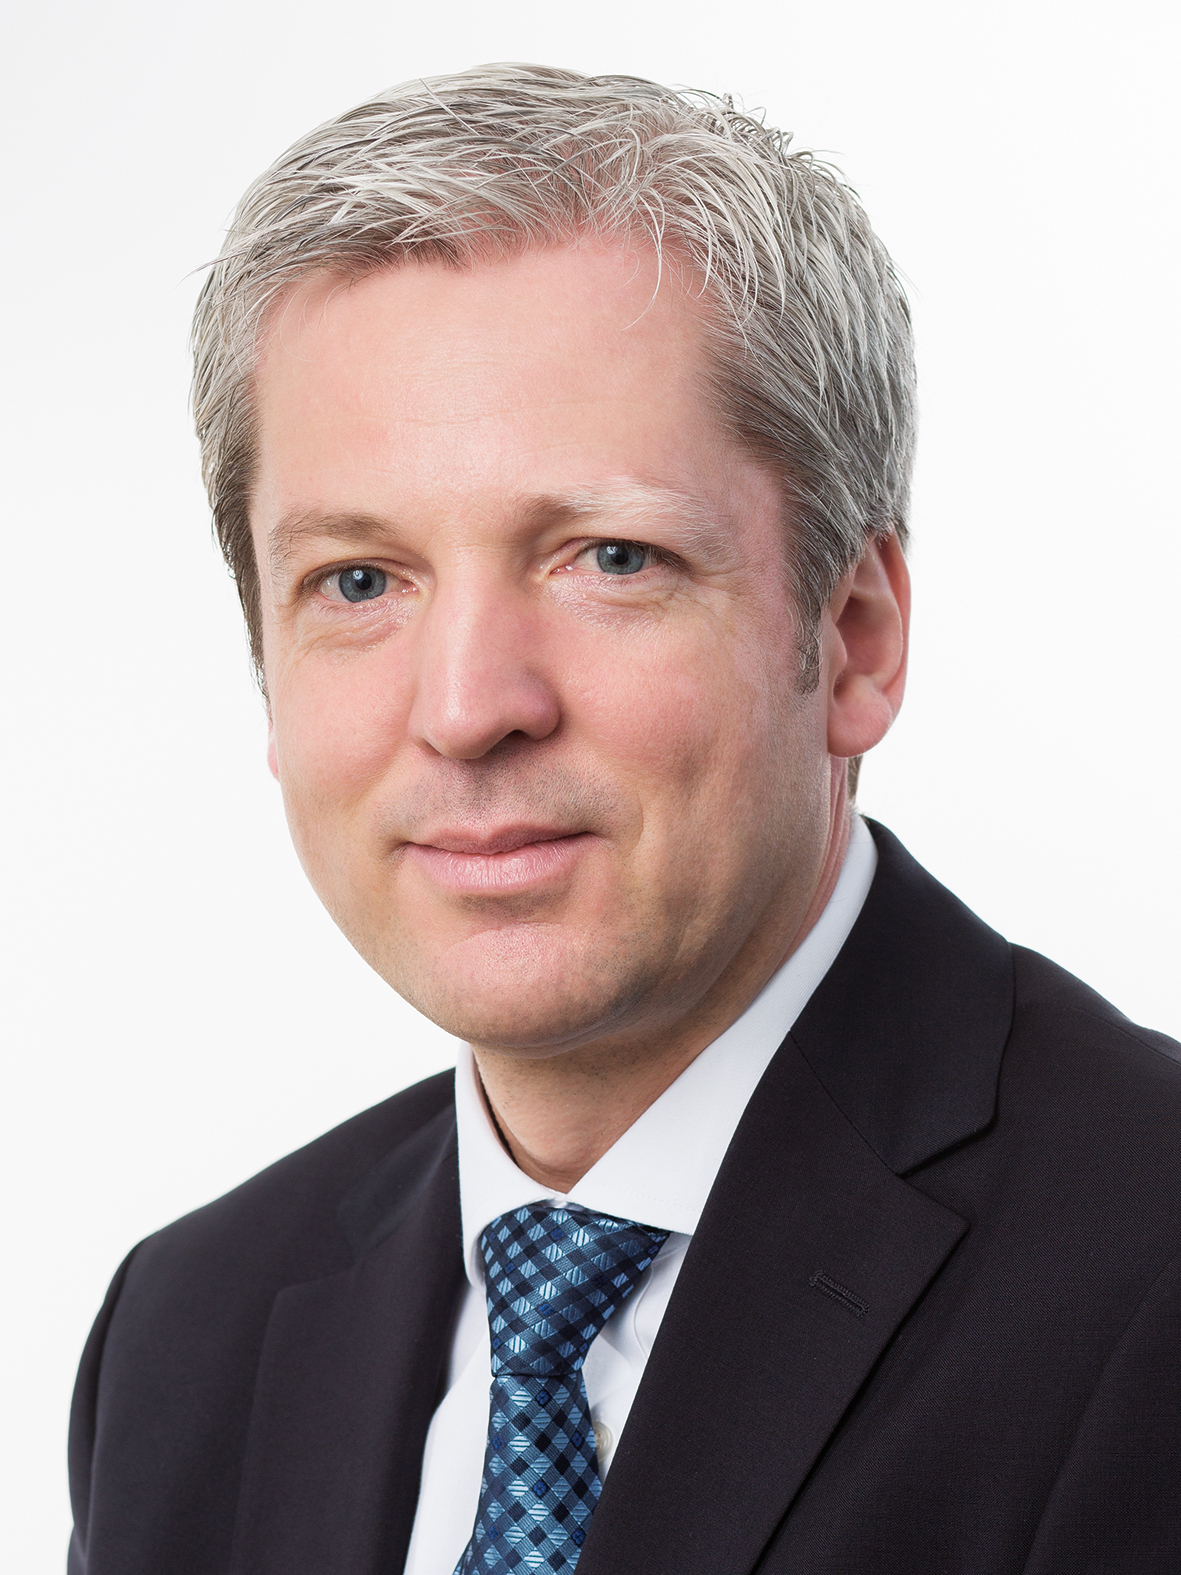 Andreas Schellhammer, CEO at Stoll.